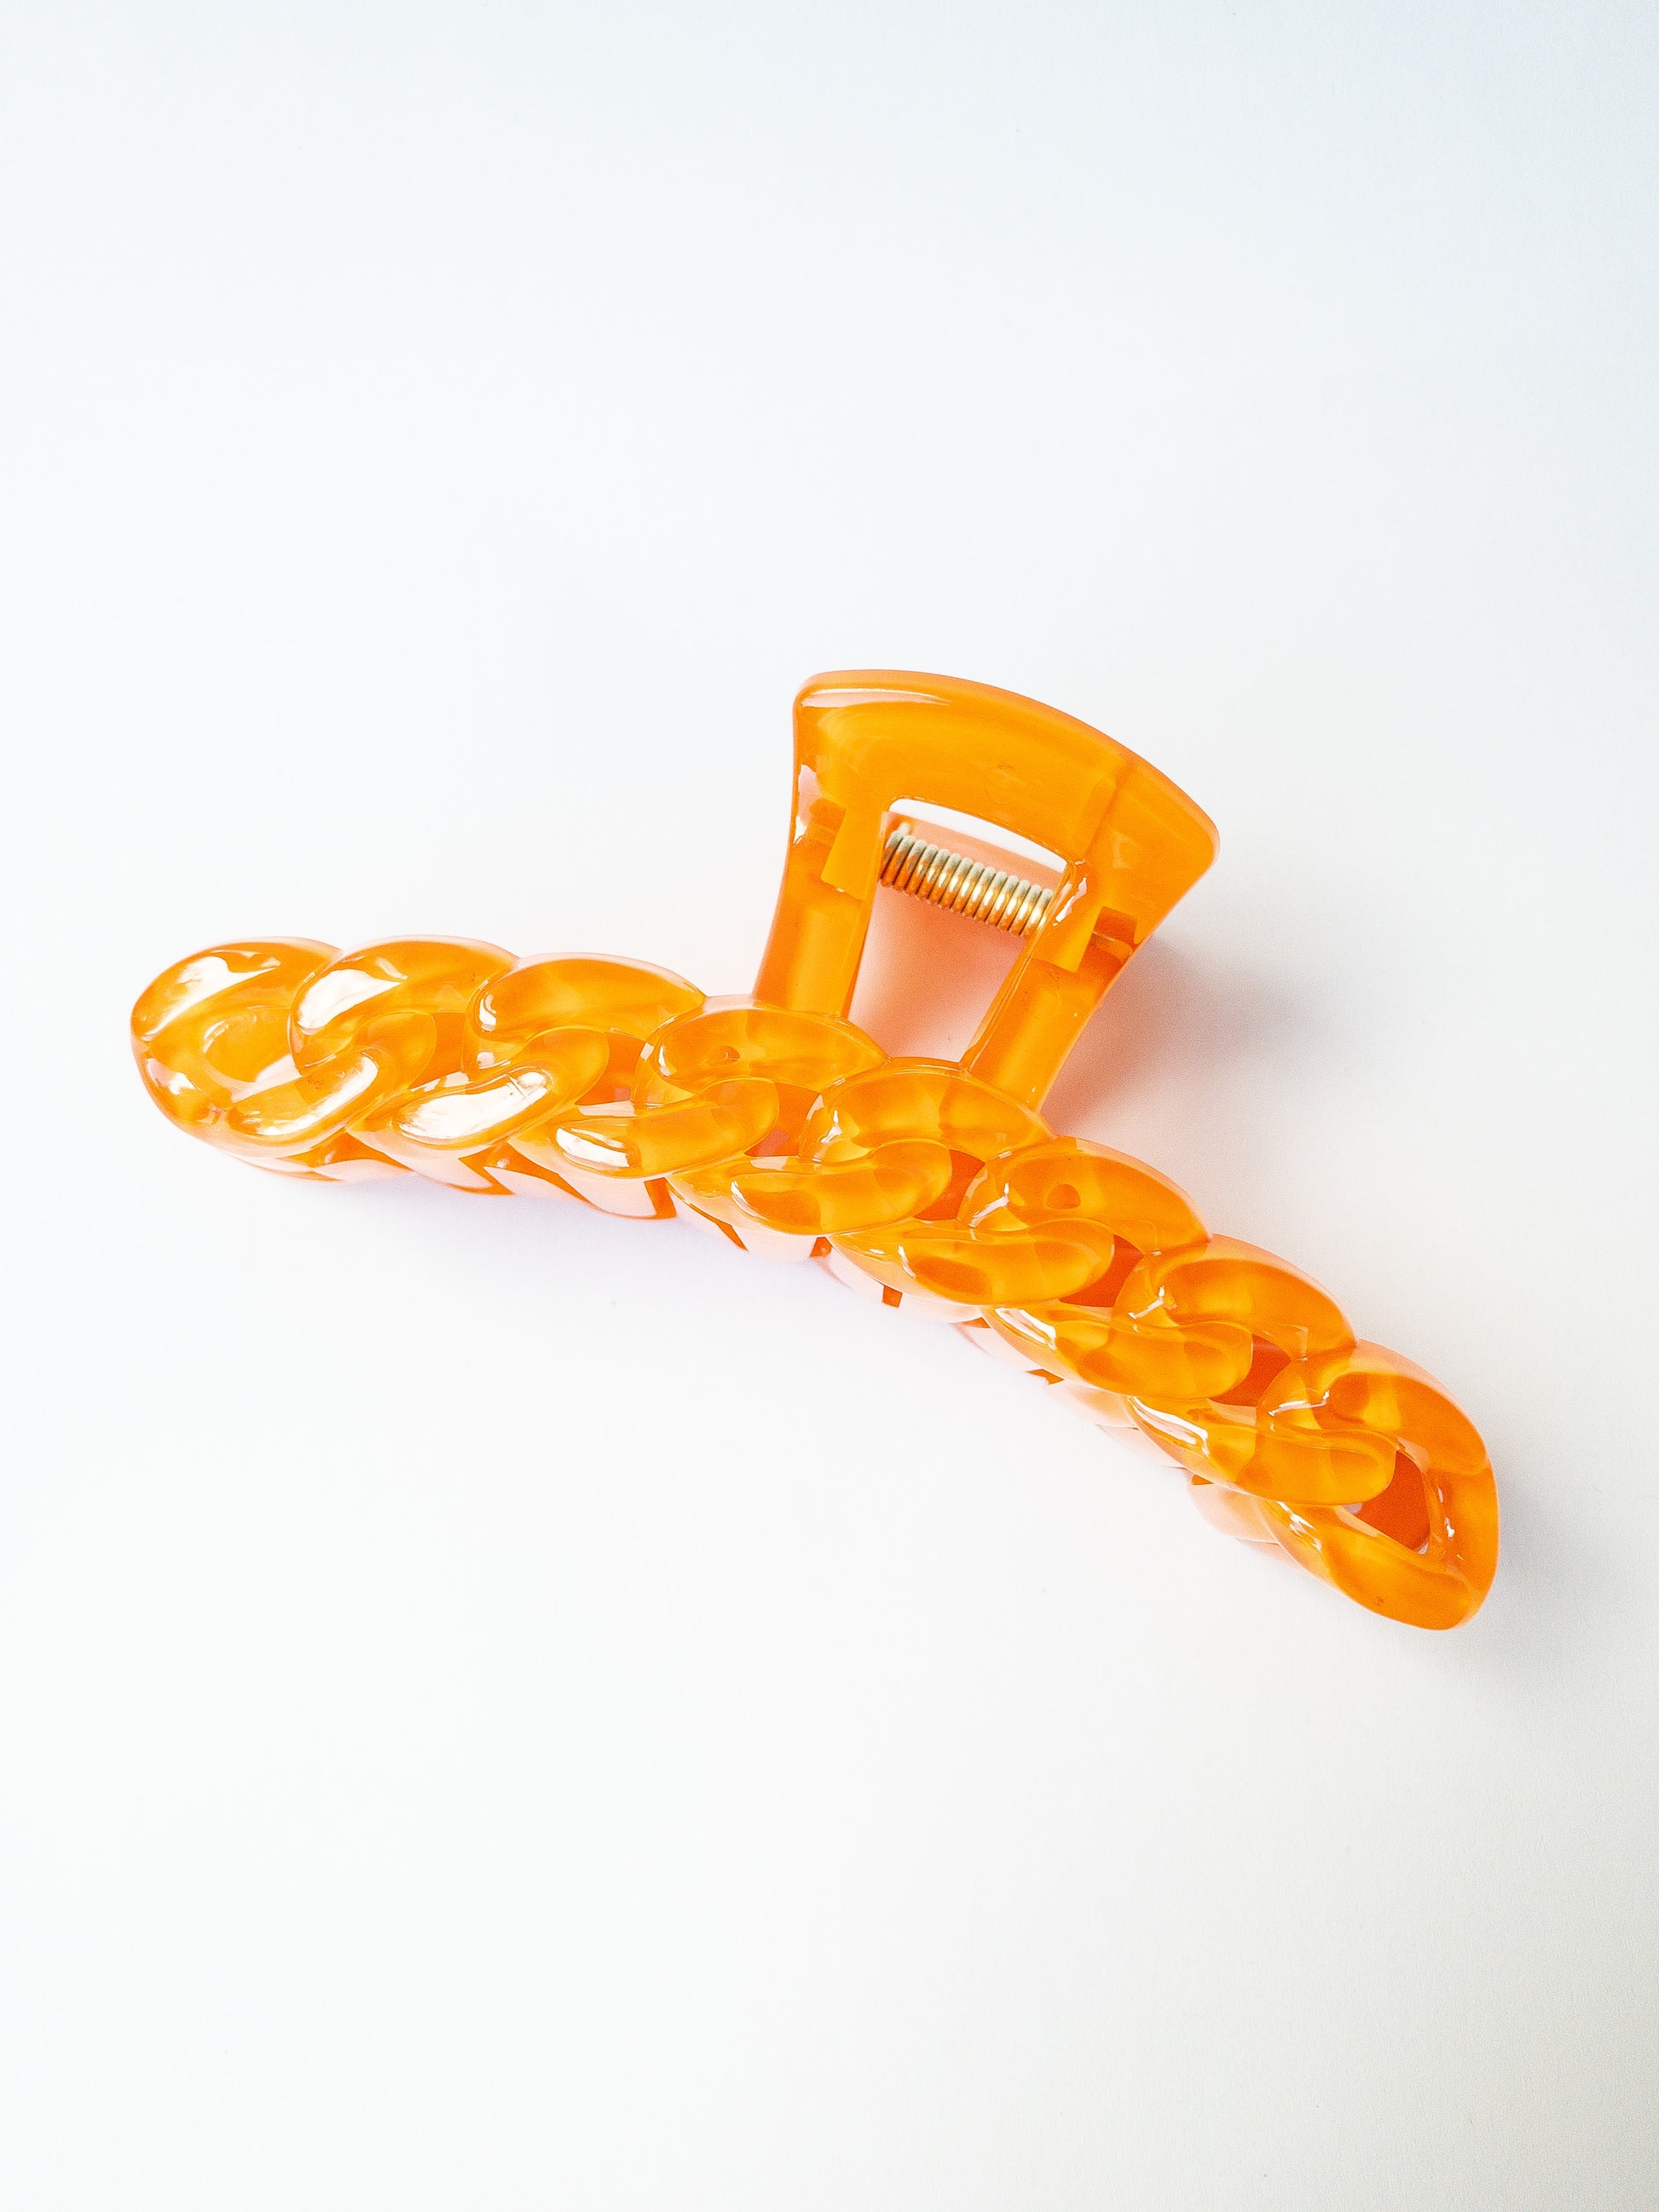 The brightest chain link hair claw clip in the most delectable candy hue! This orange hair claw is large in size and strong enough to sweep up your hair in a messy updo. You're going to want one in every color!